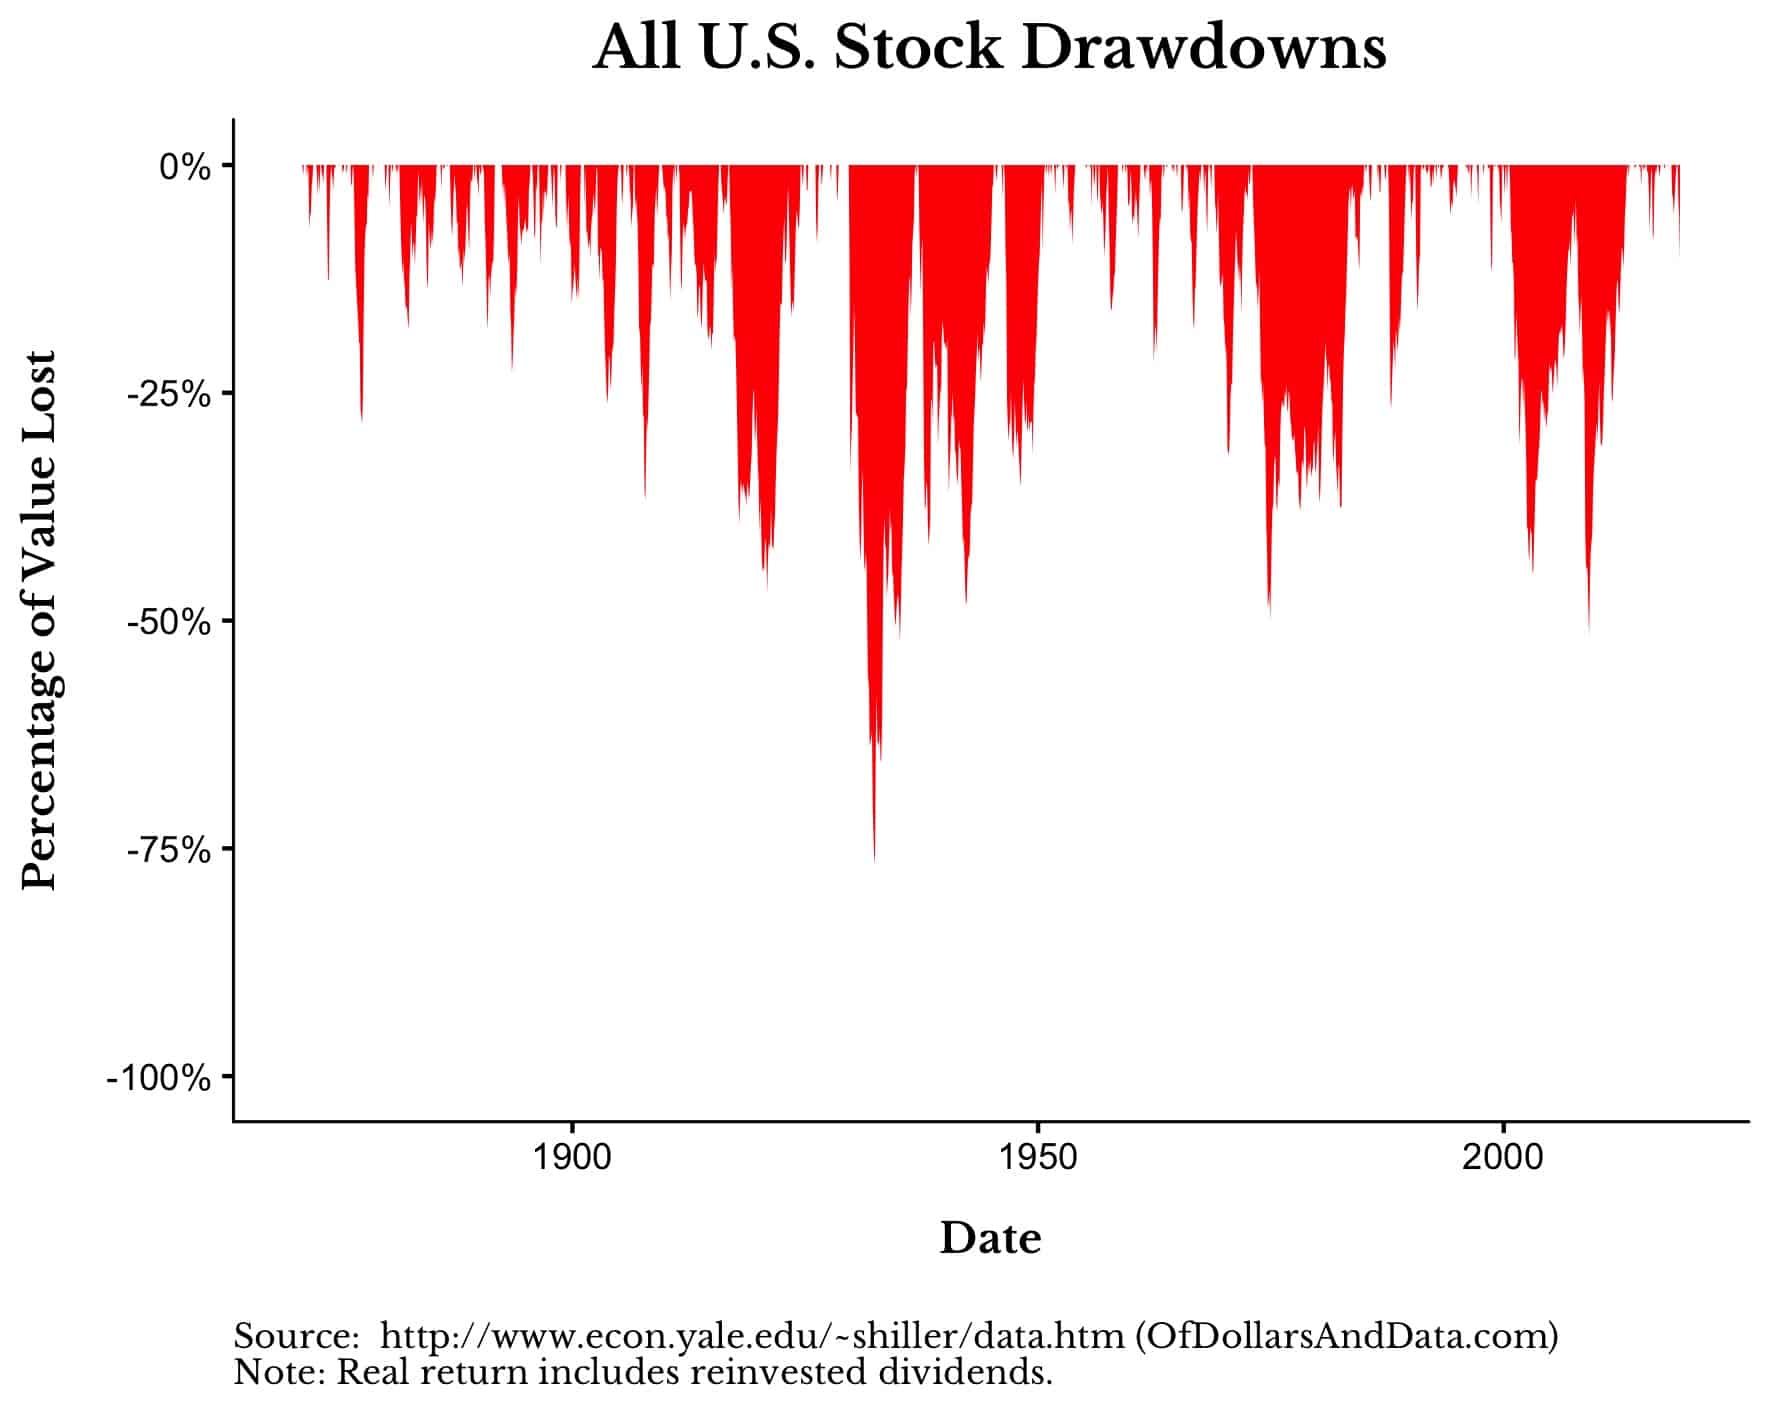 All US stocks drawdowns from 1871 to 2019.